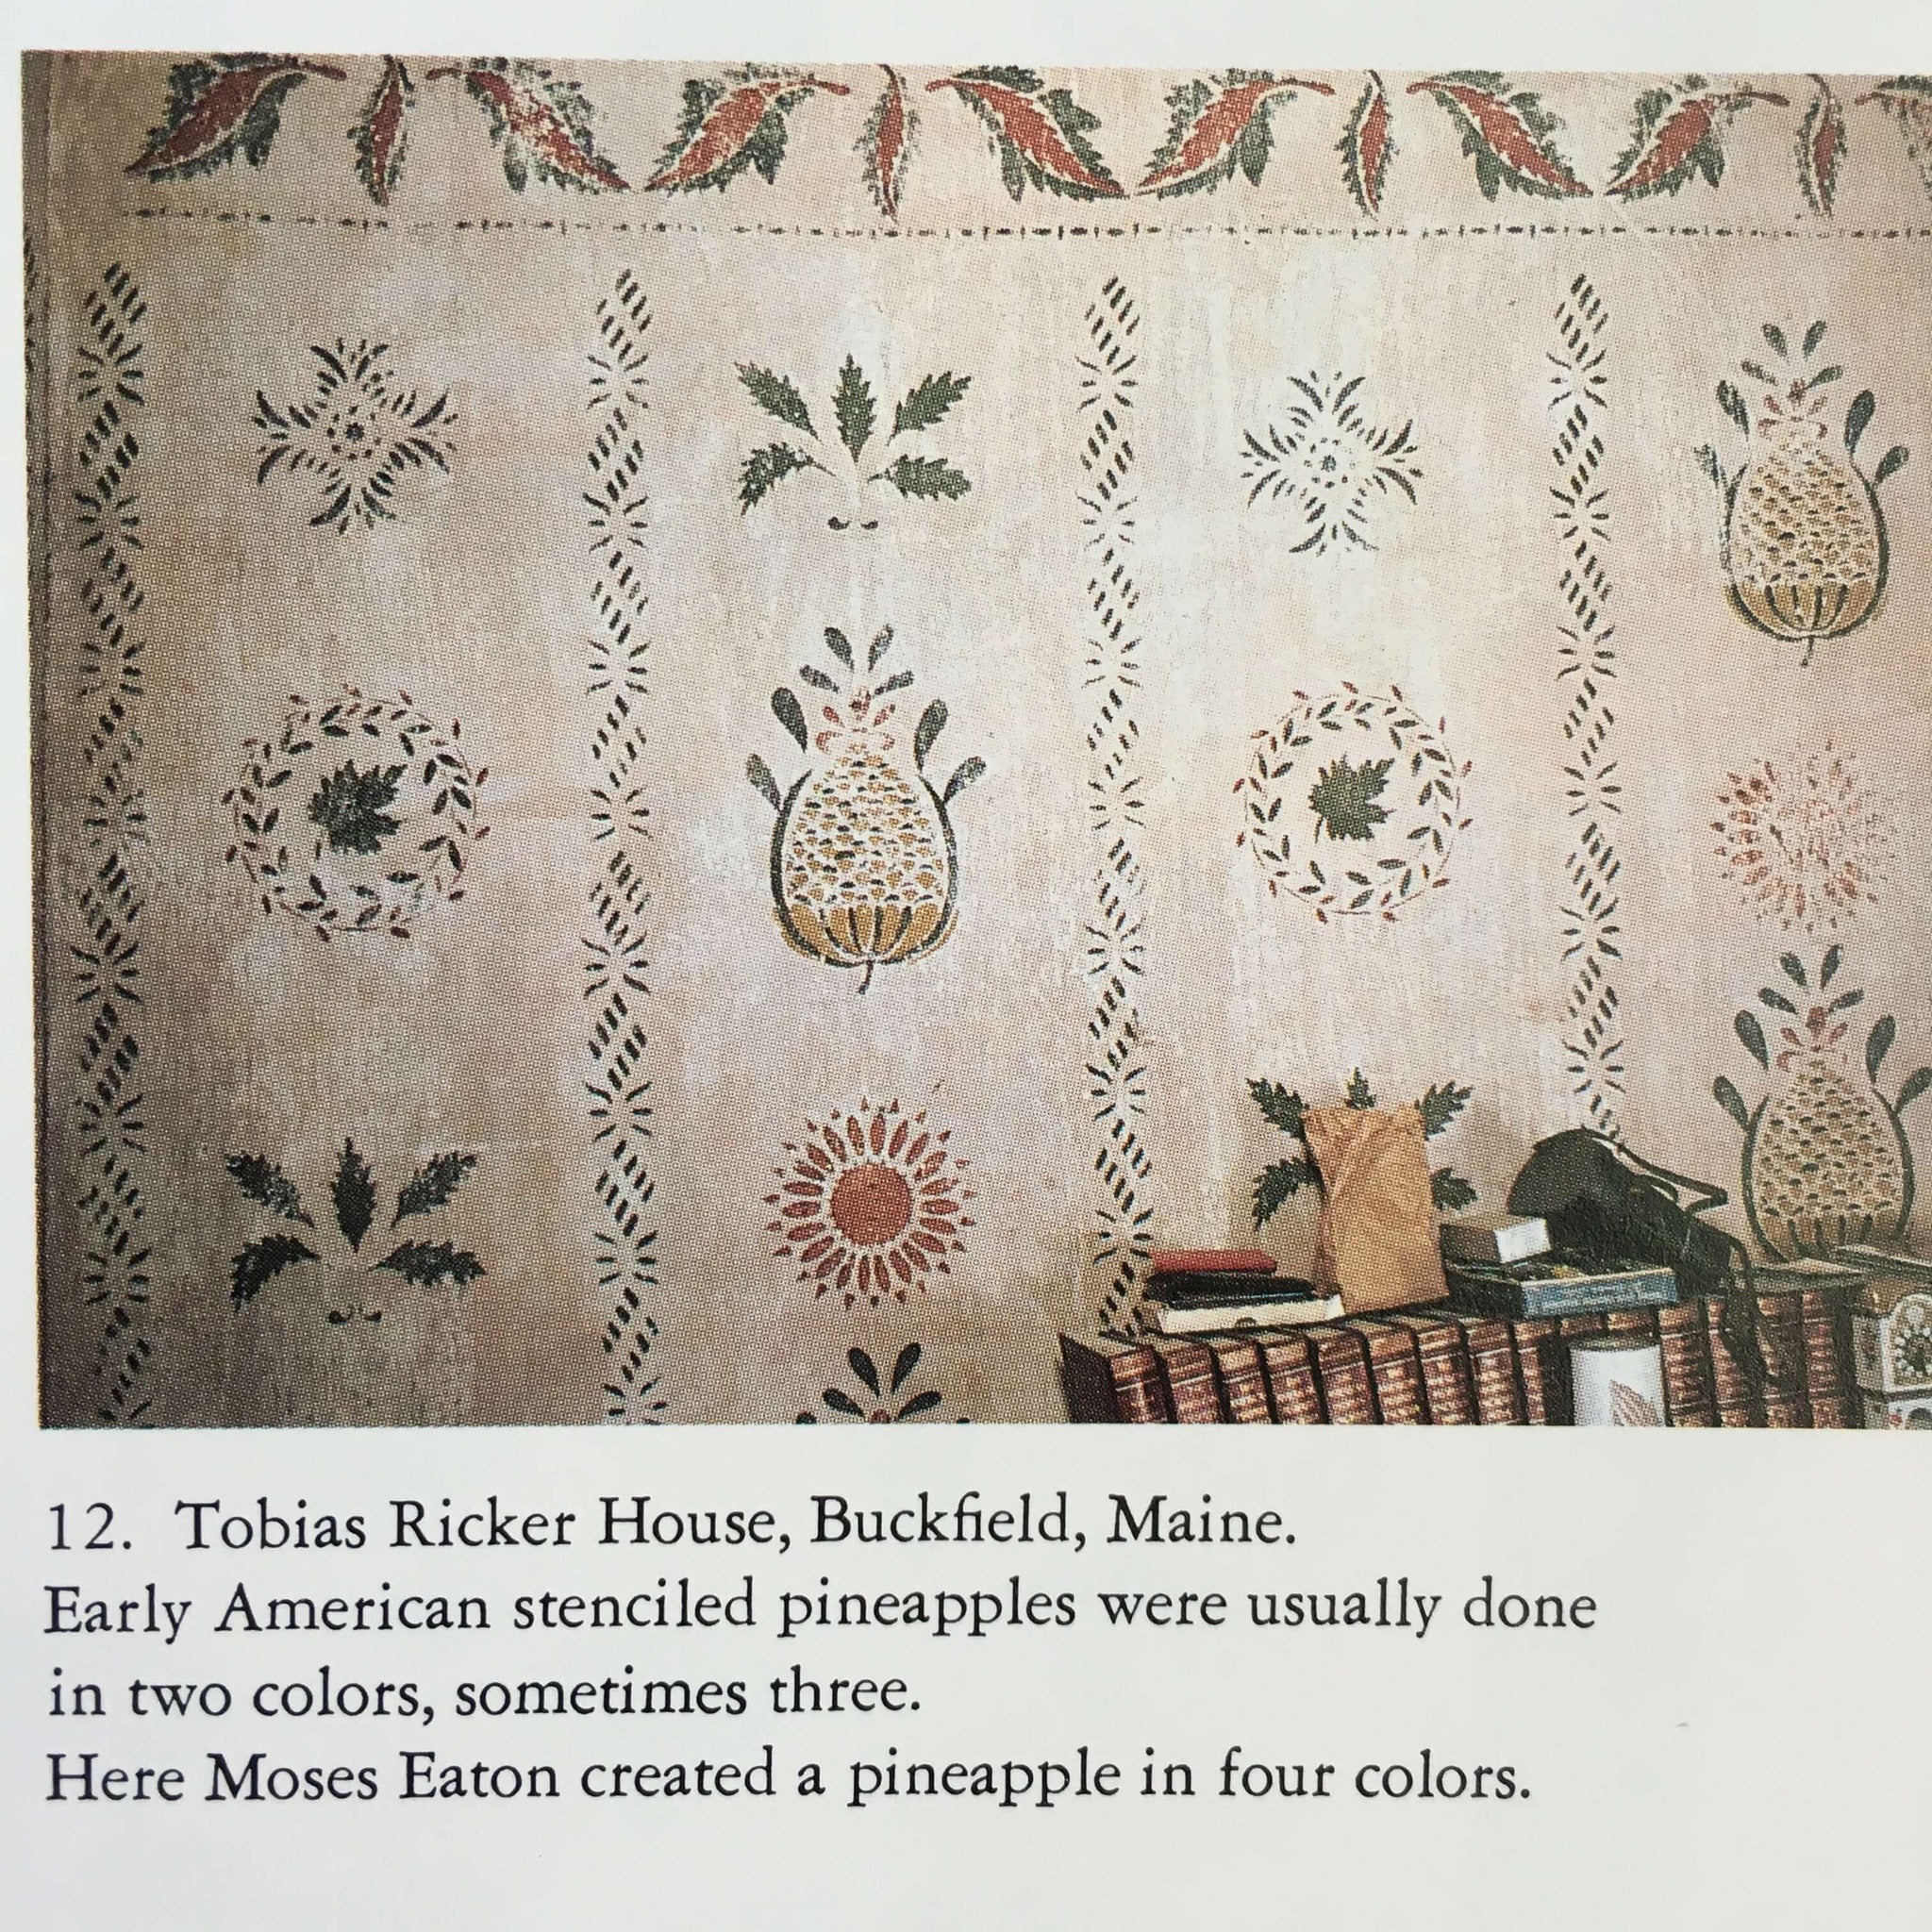 Early American Wall Stencils in Color - Alice Bancroft Fjelstul and Patricia Brown Schad - 1982 First Edition